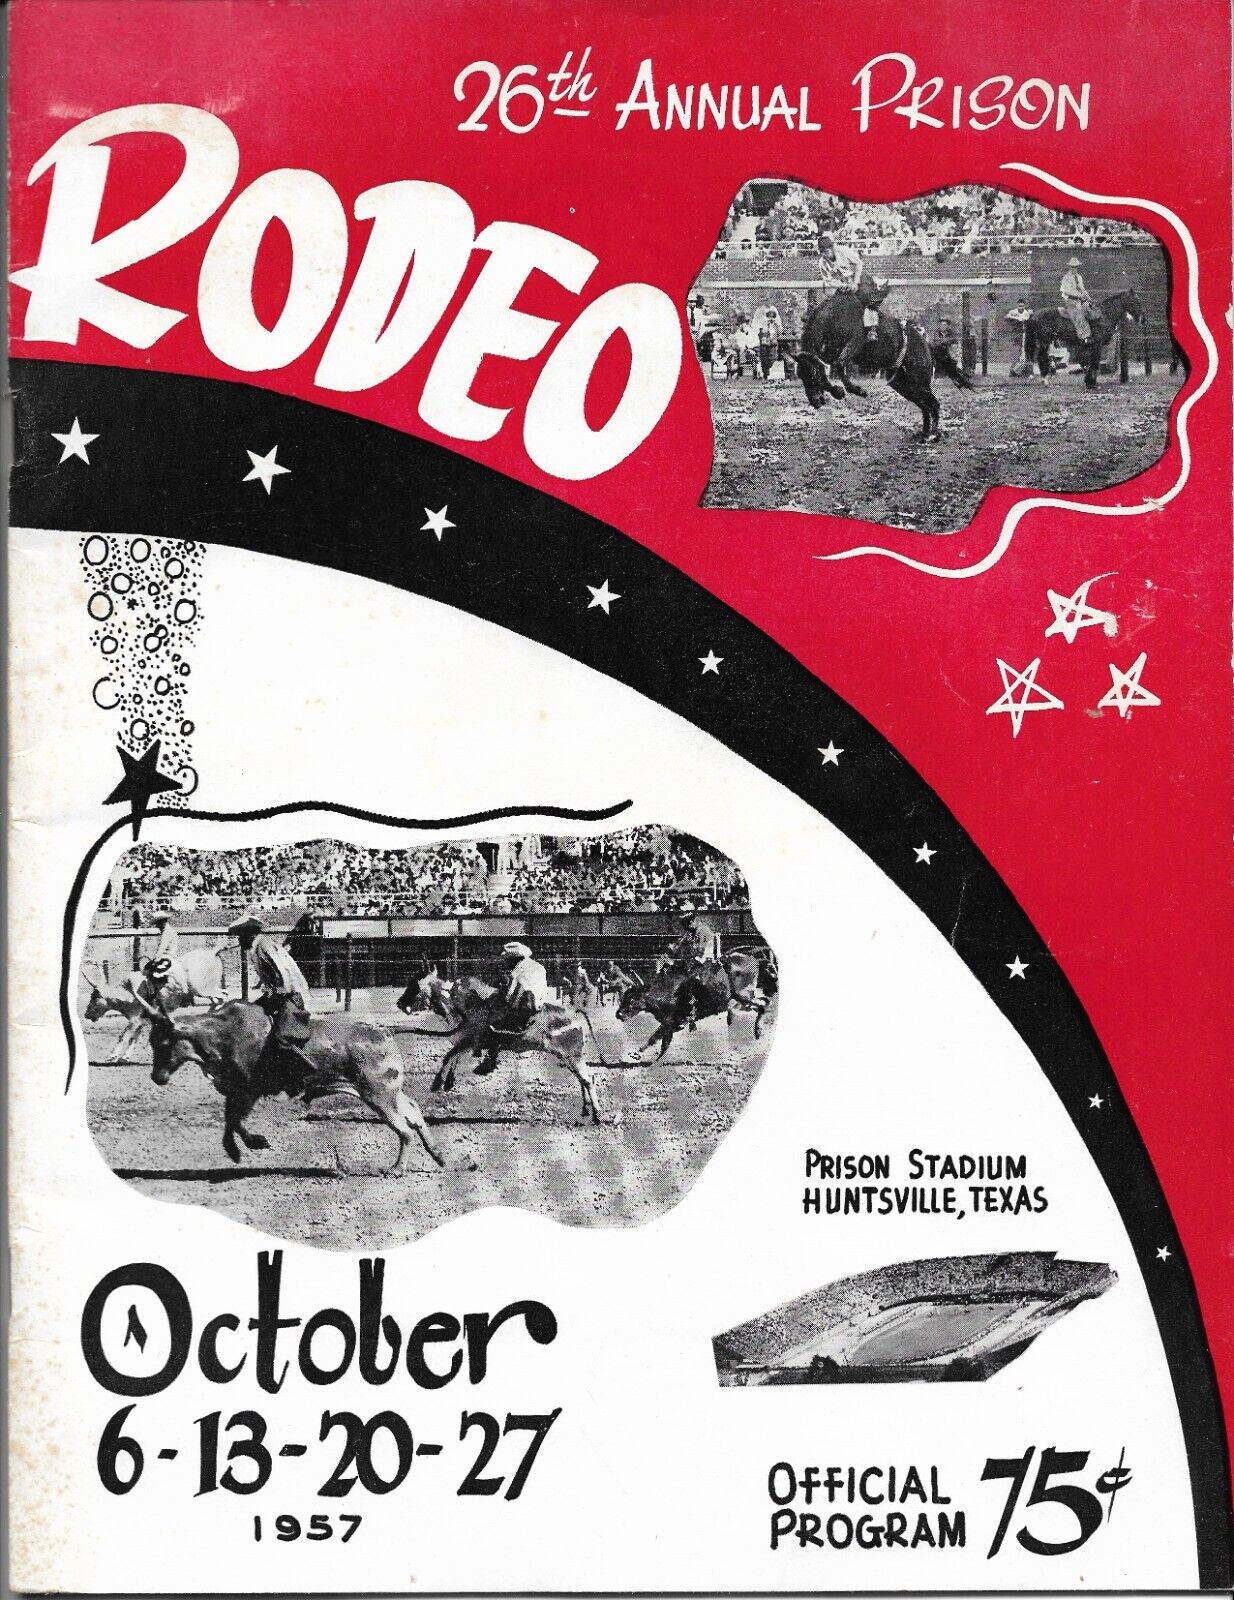 Prison Rodeo Huntsville Texas  Oct 27, 1957  Official Program 26th Annual Rodeo